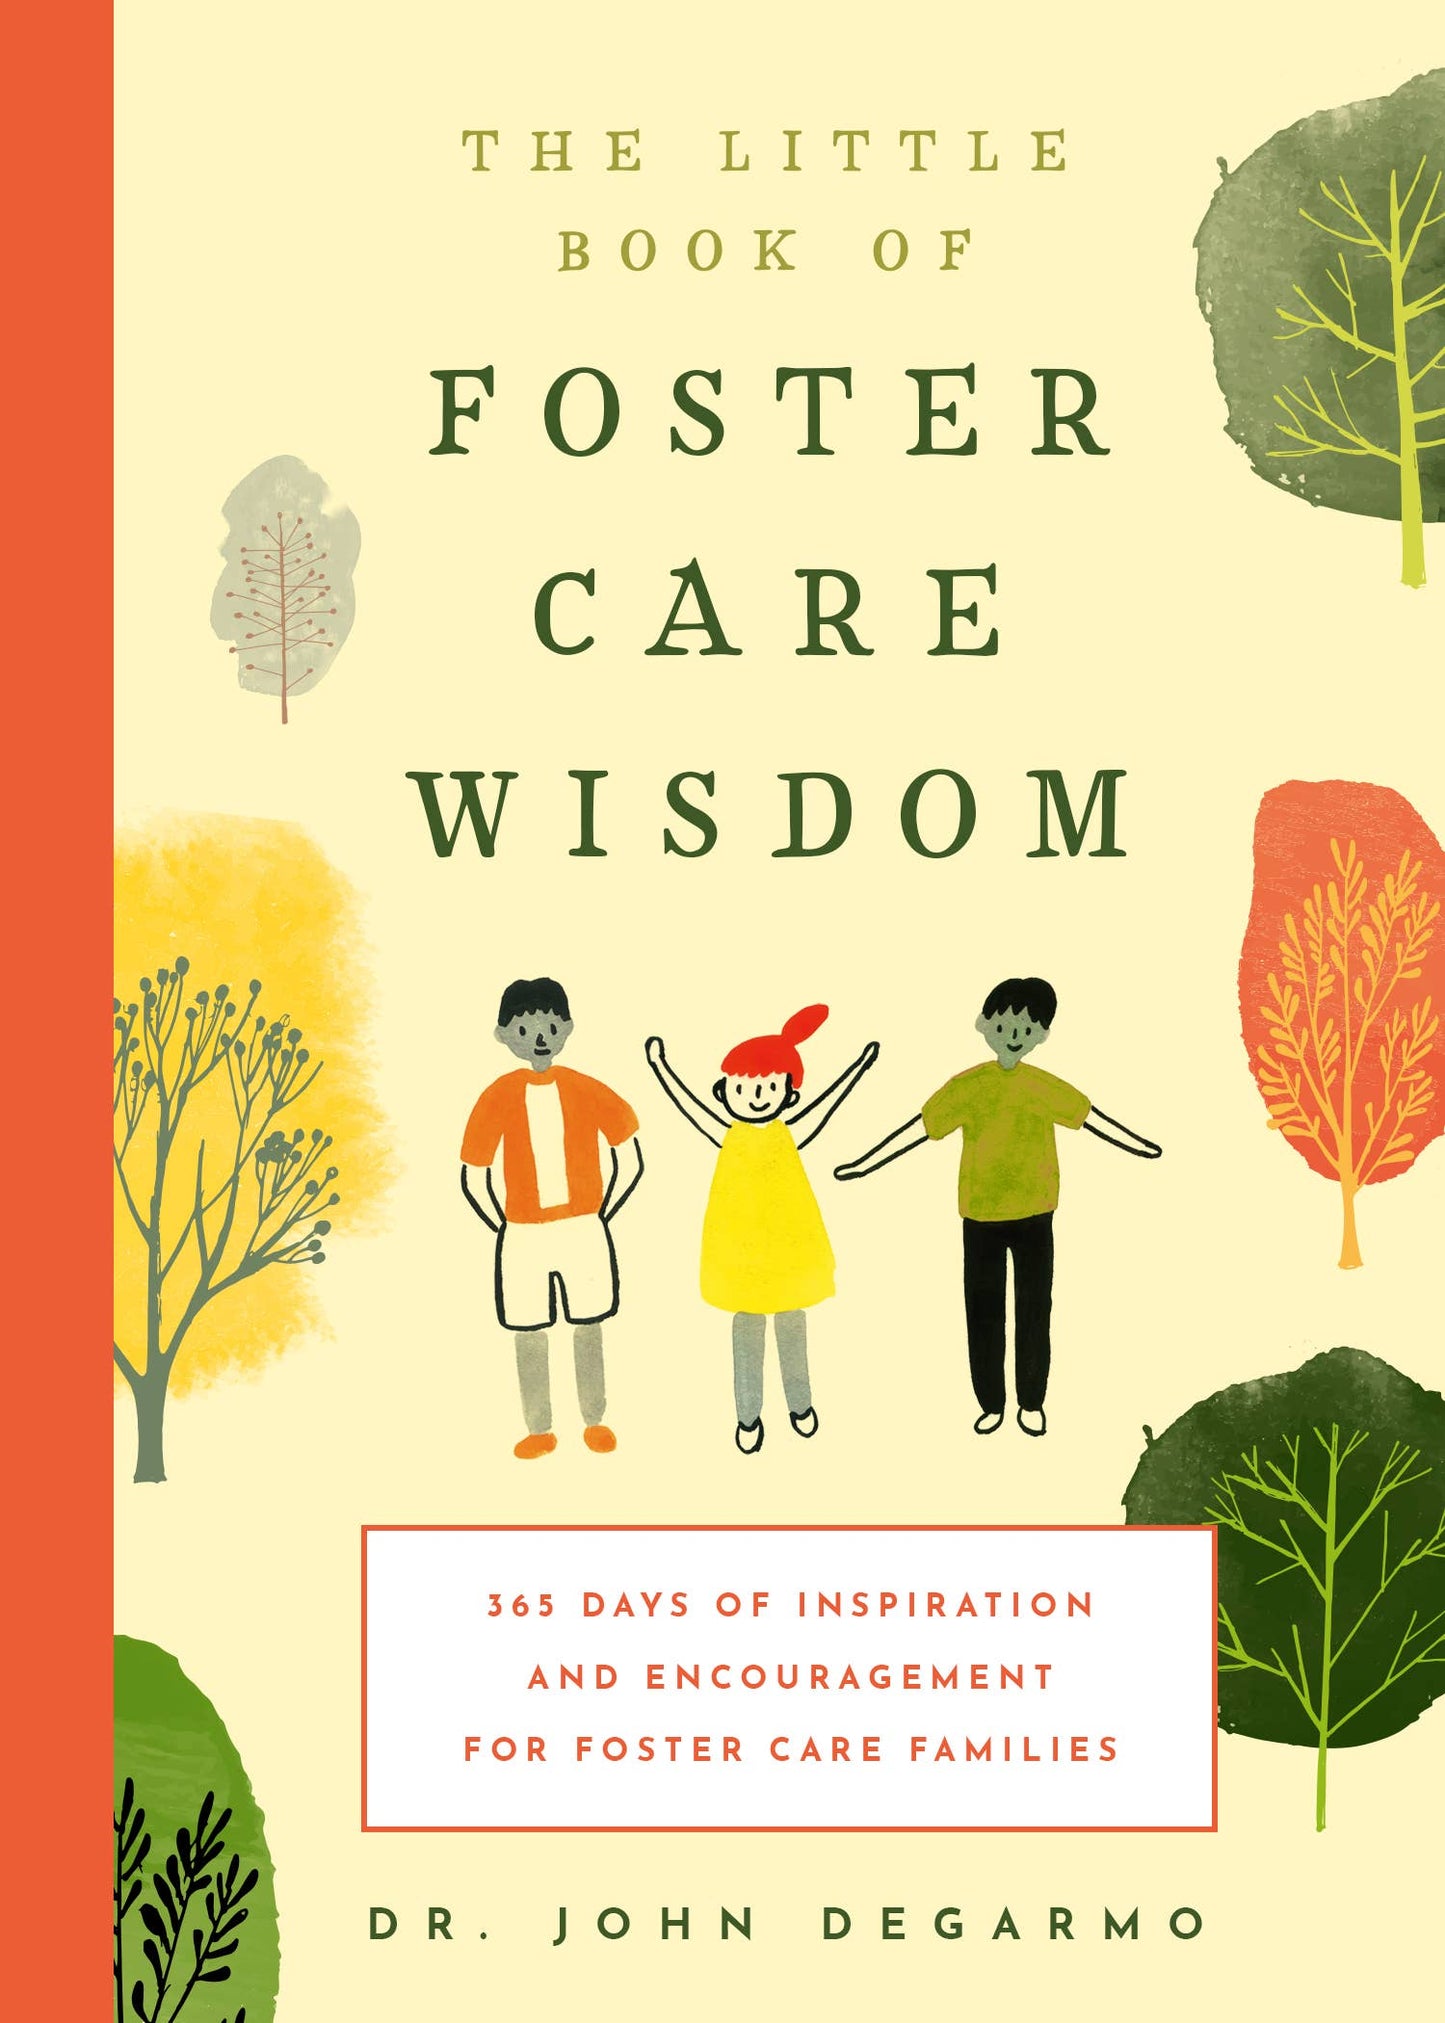 The Little Book of Foster Care Wisdom